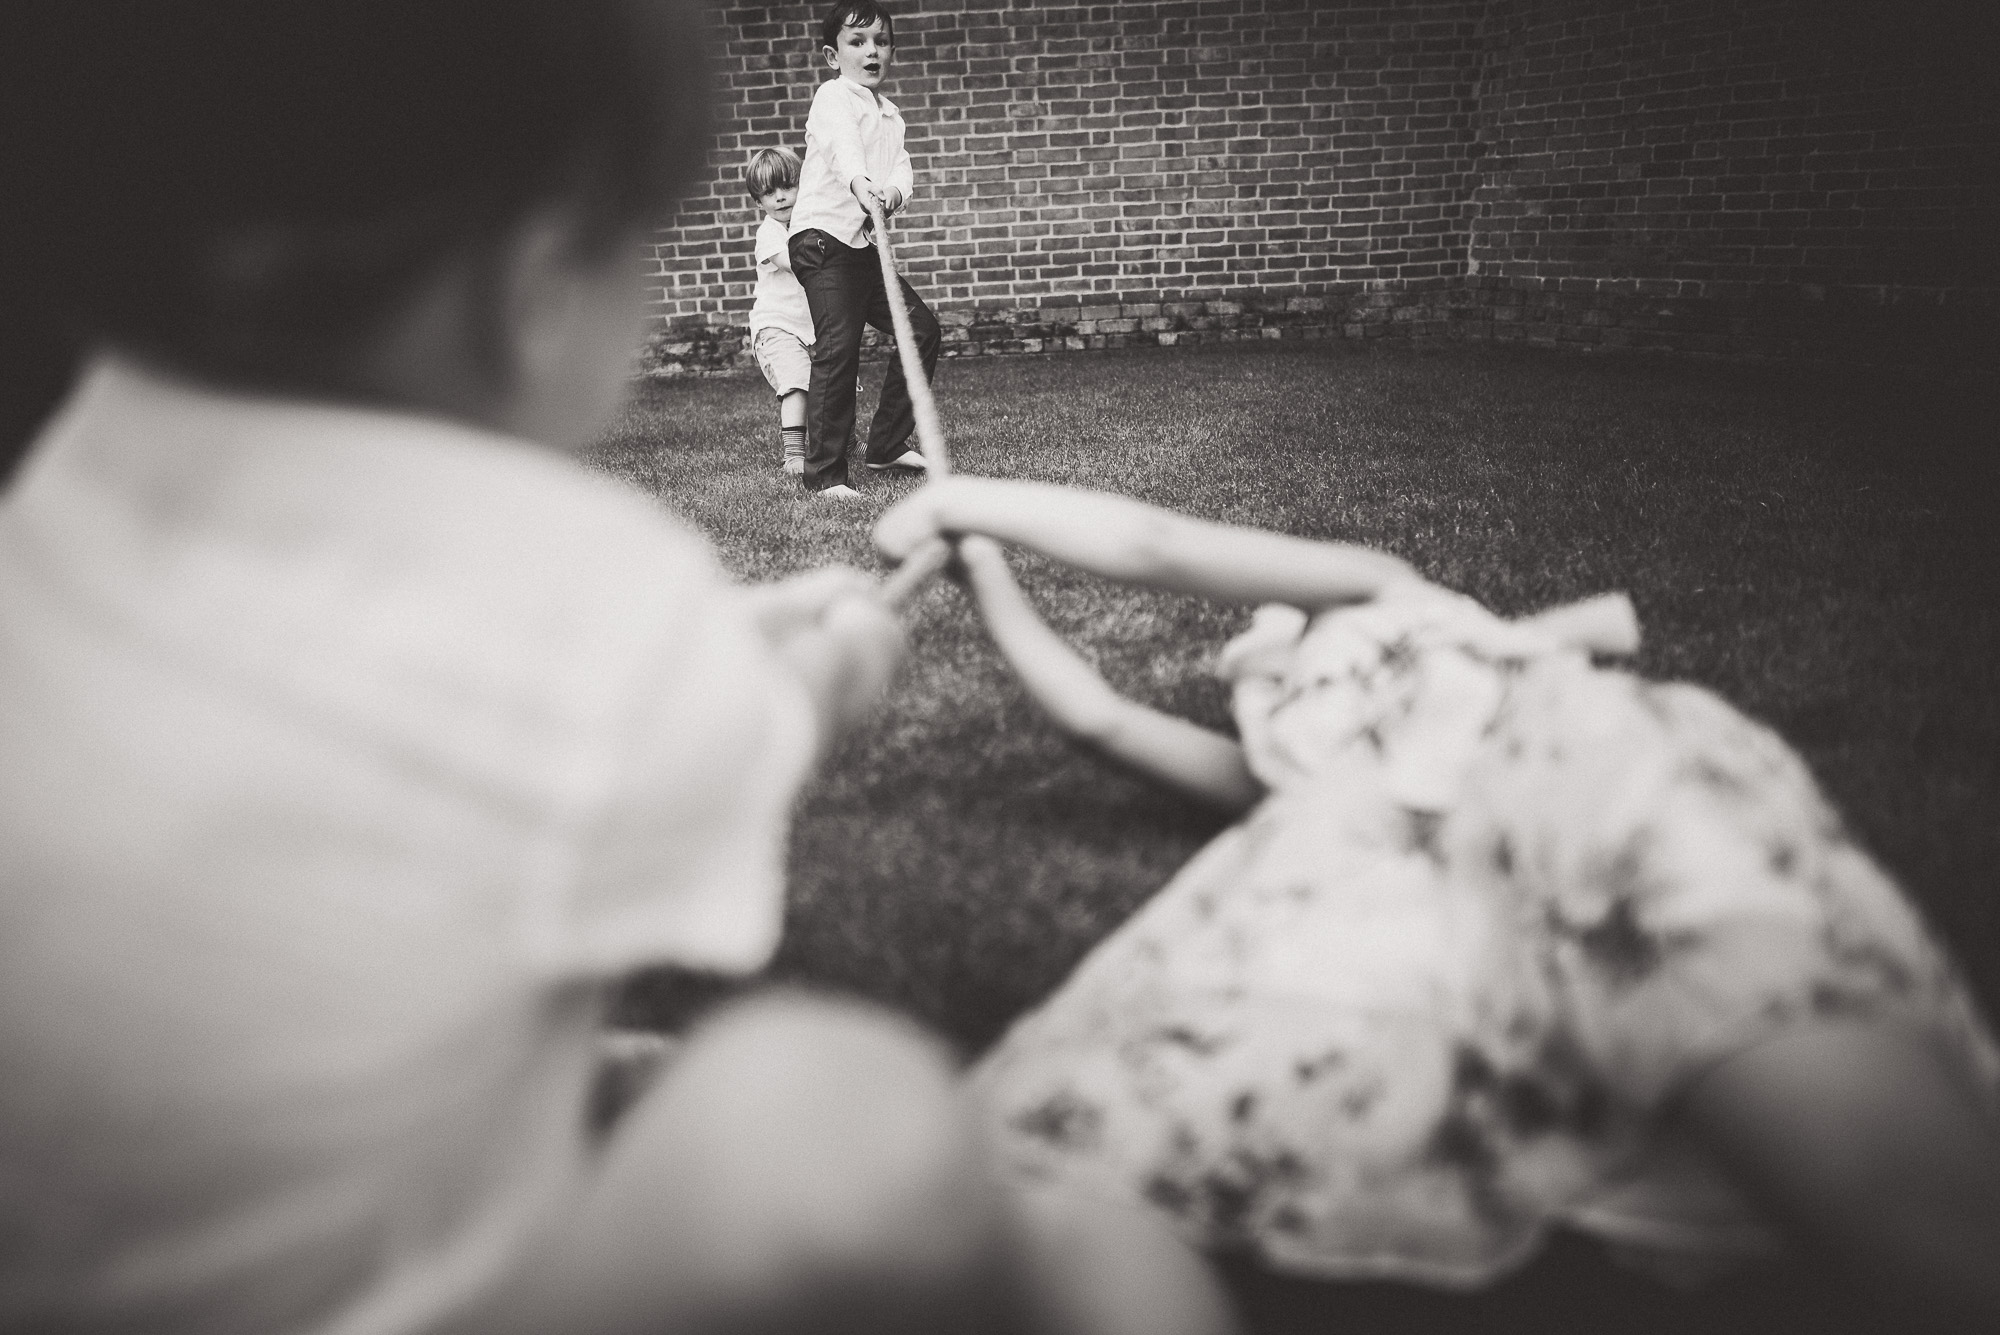 A black and white photo of two children playing in the grass, captured by a wedding photographer.